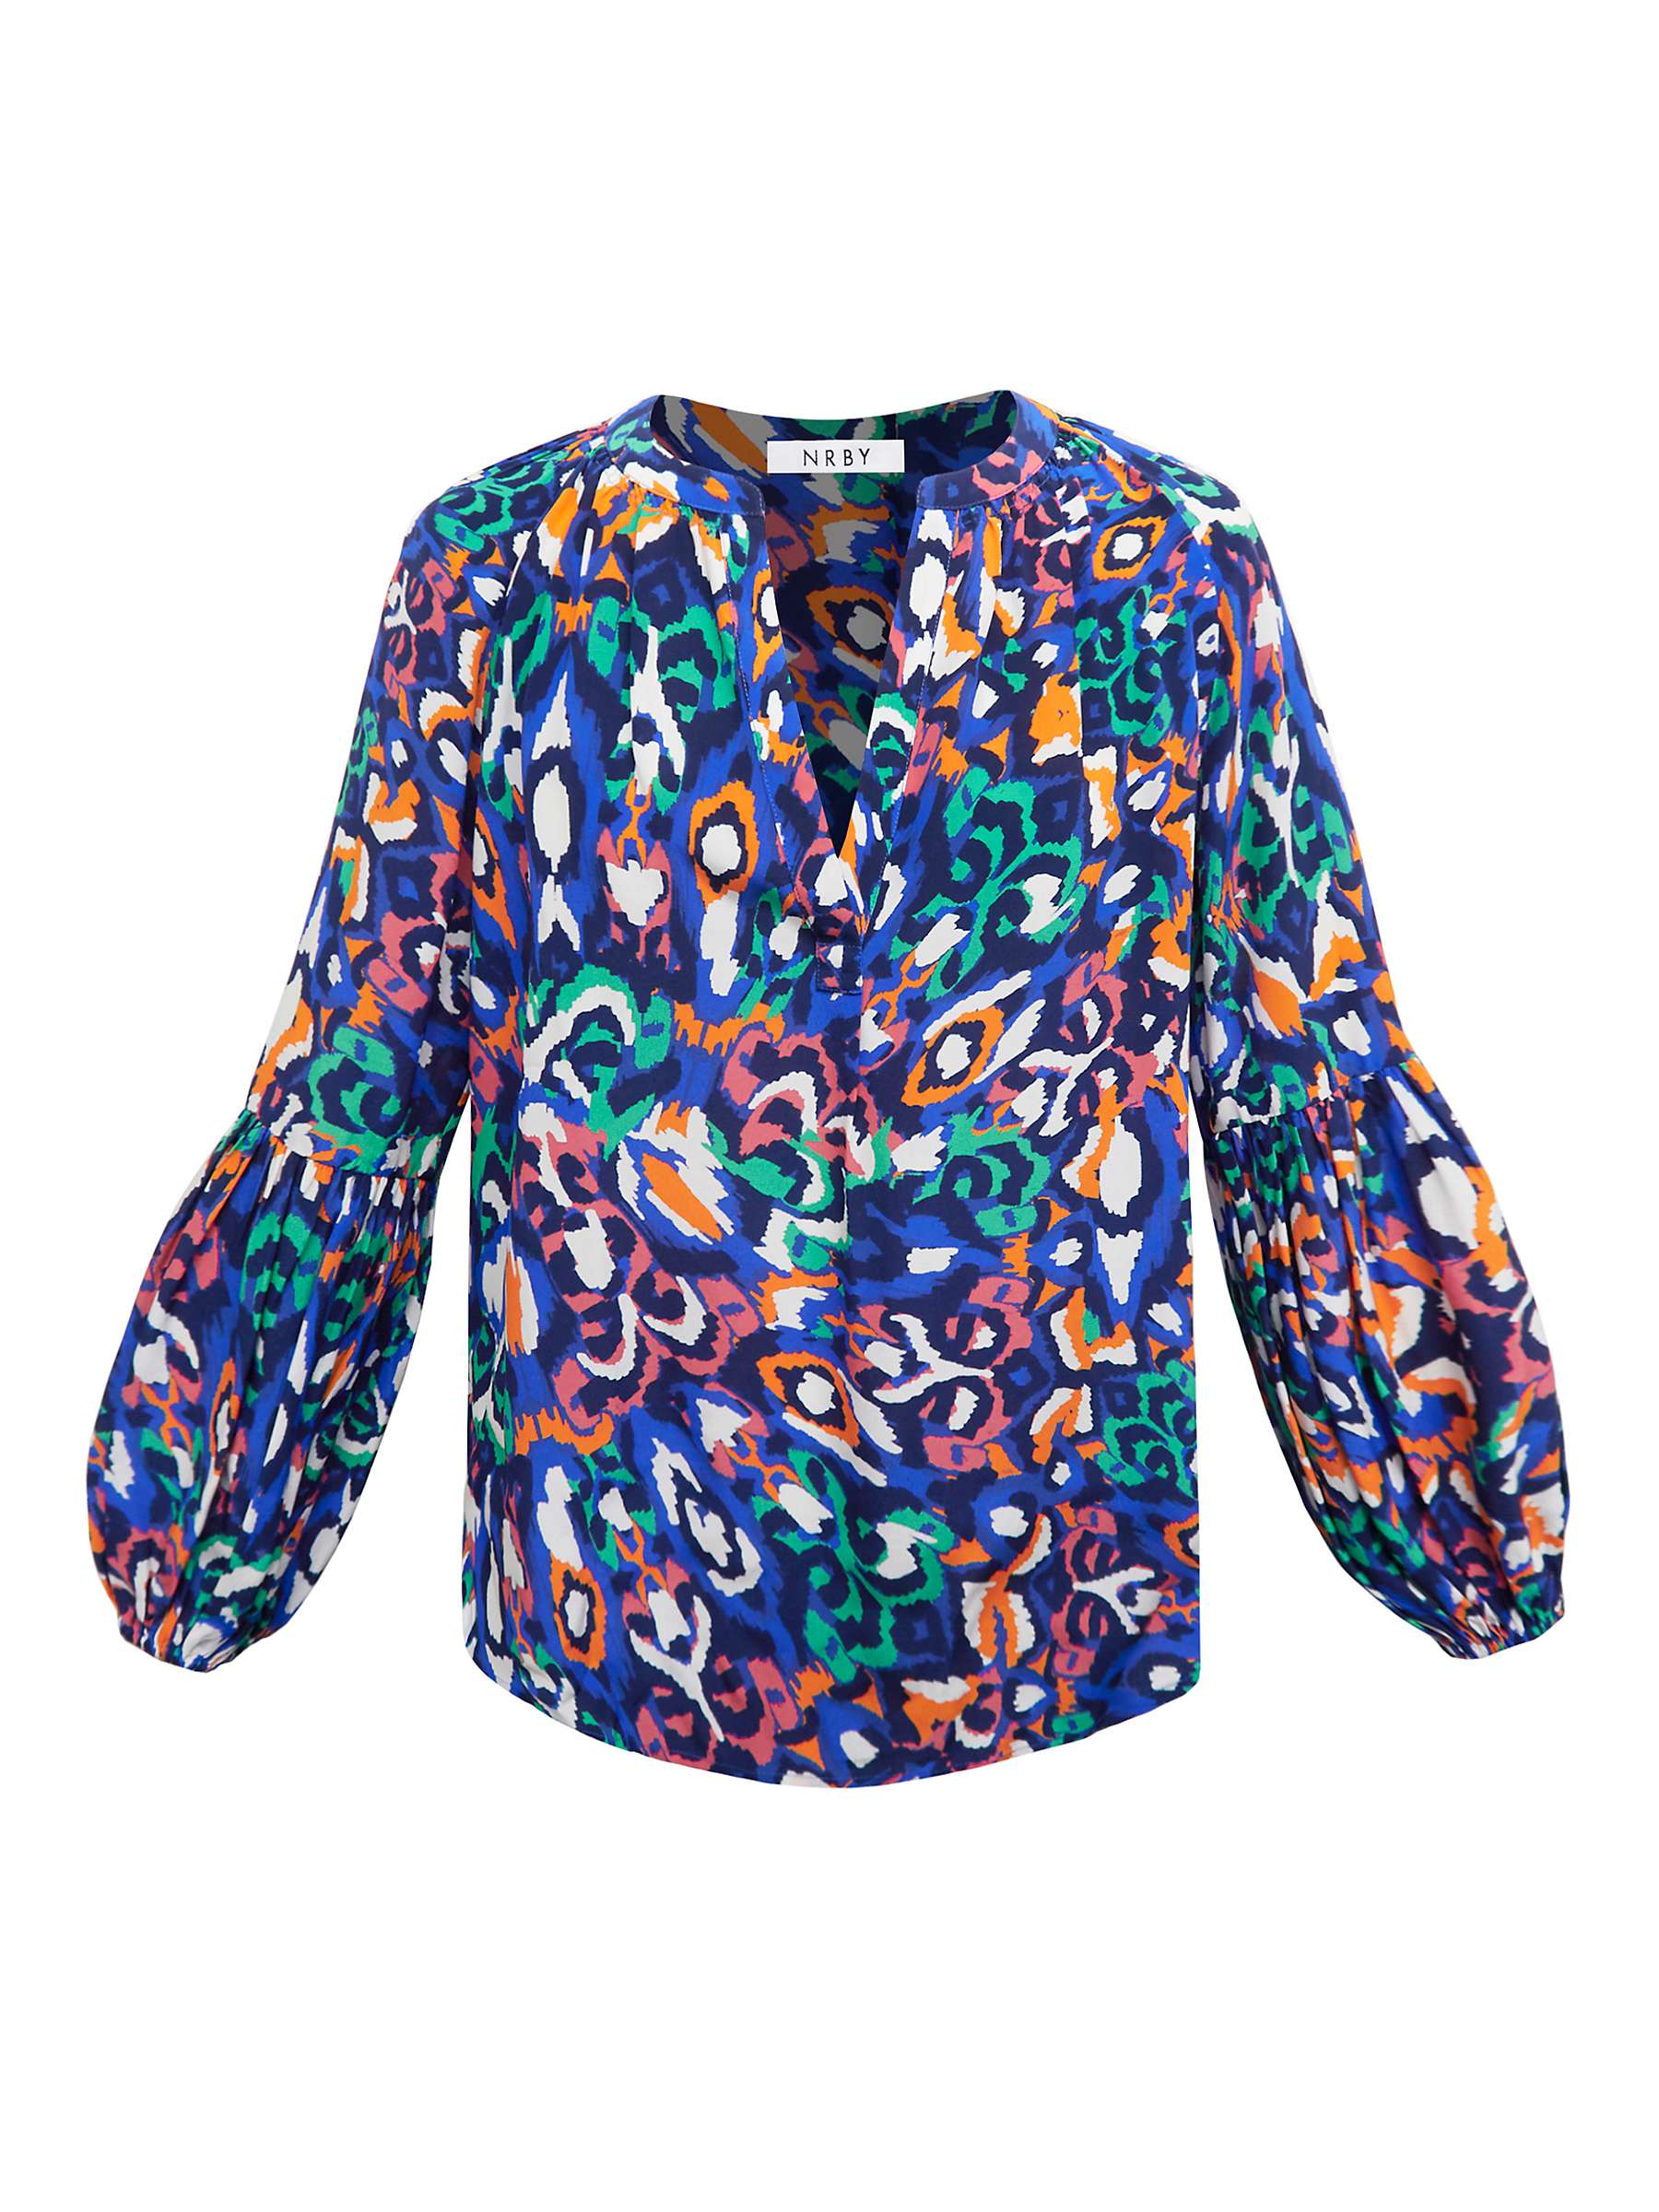 Buy NRBY Ophelia Silk Feather Shirt, Feather Print Online at johnlewis.com